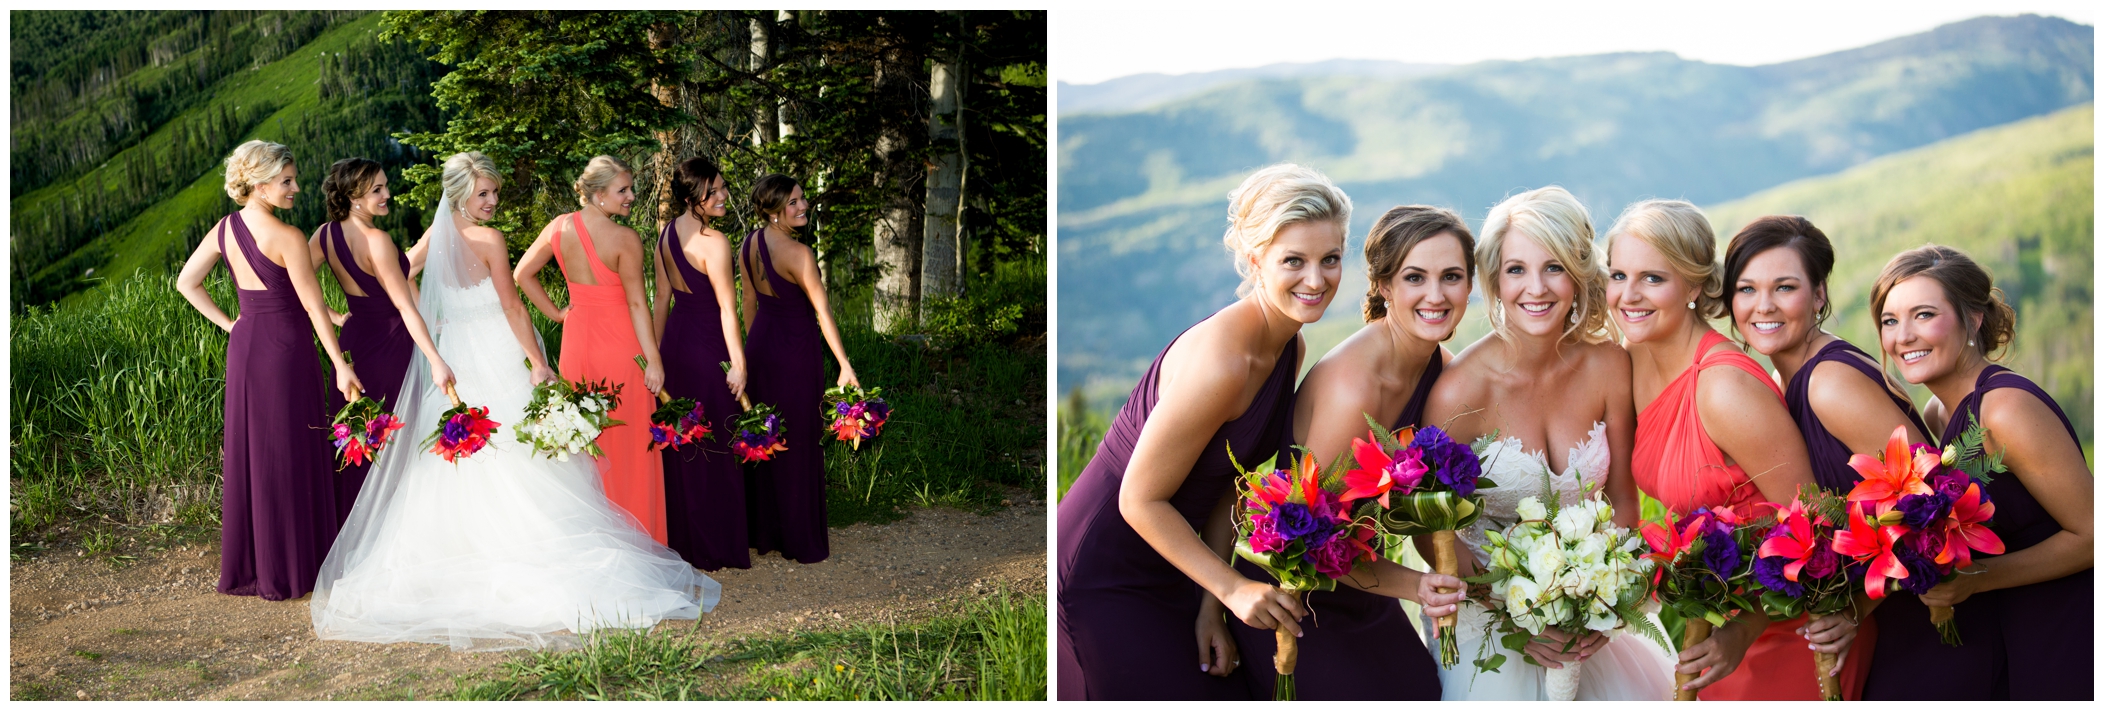 purple and coral wedding inspiration